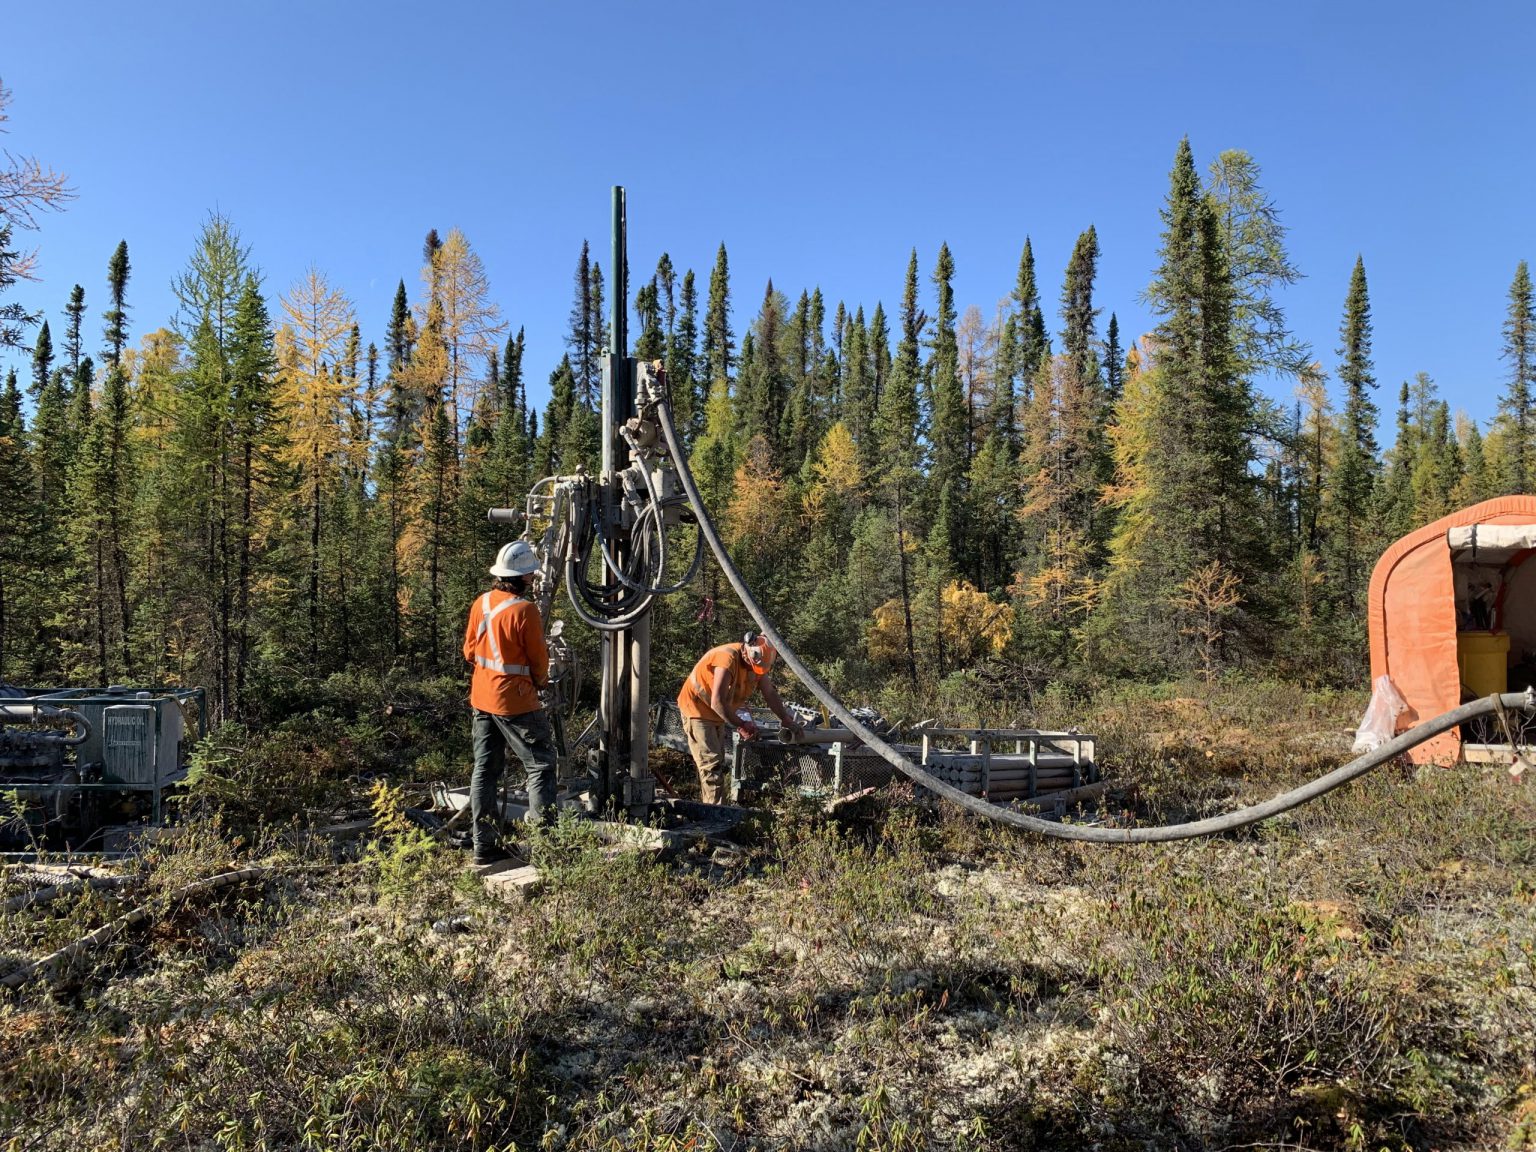 Yamana makes ‘significant progress’ in first year of generative exploration